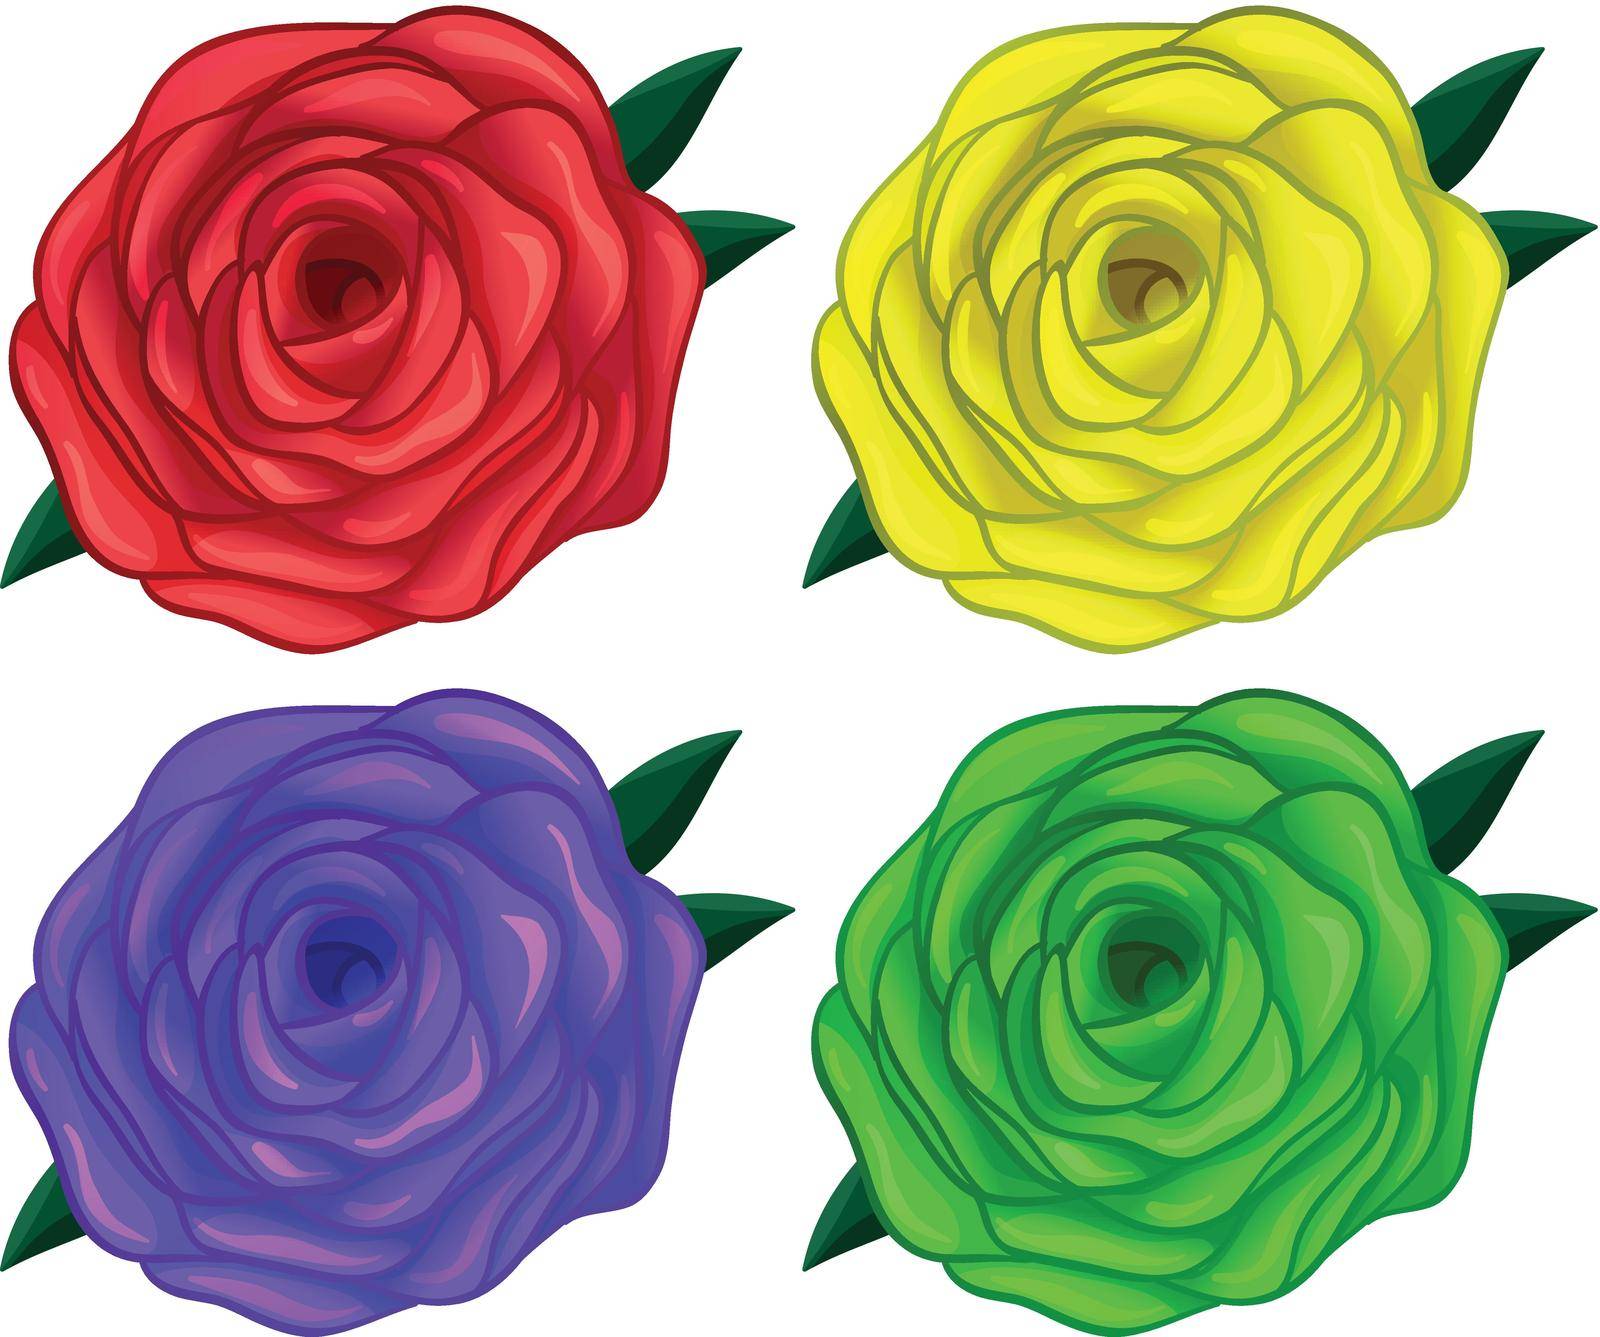 Illustration of the four colorful roses on a white background